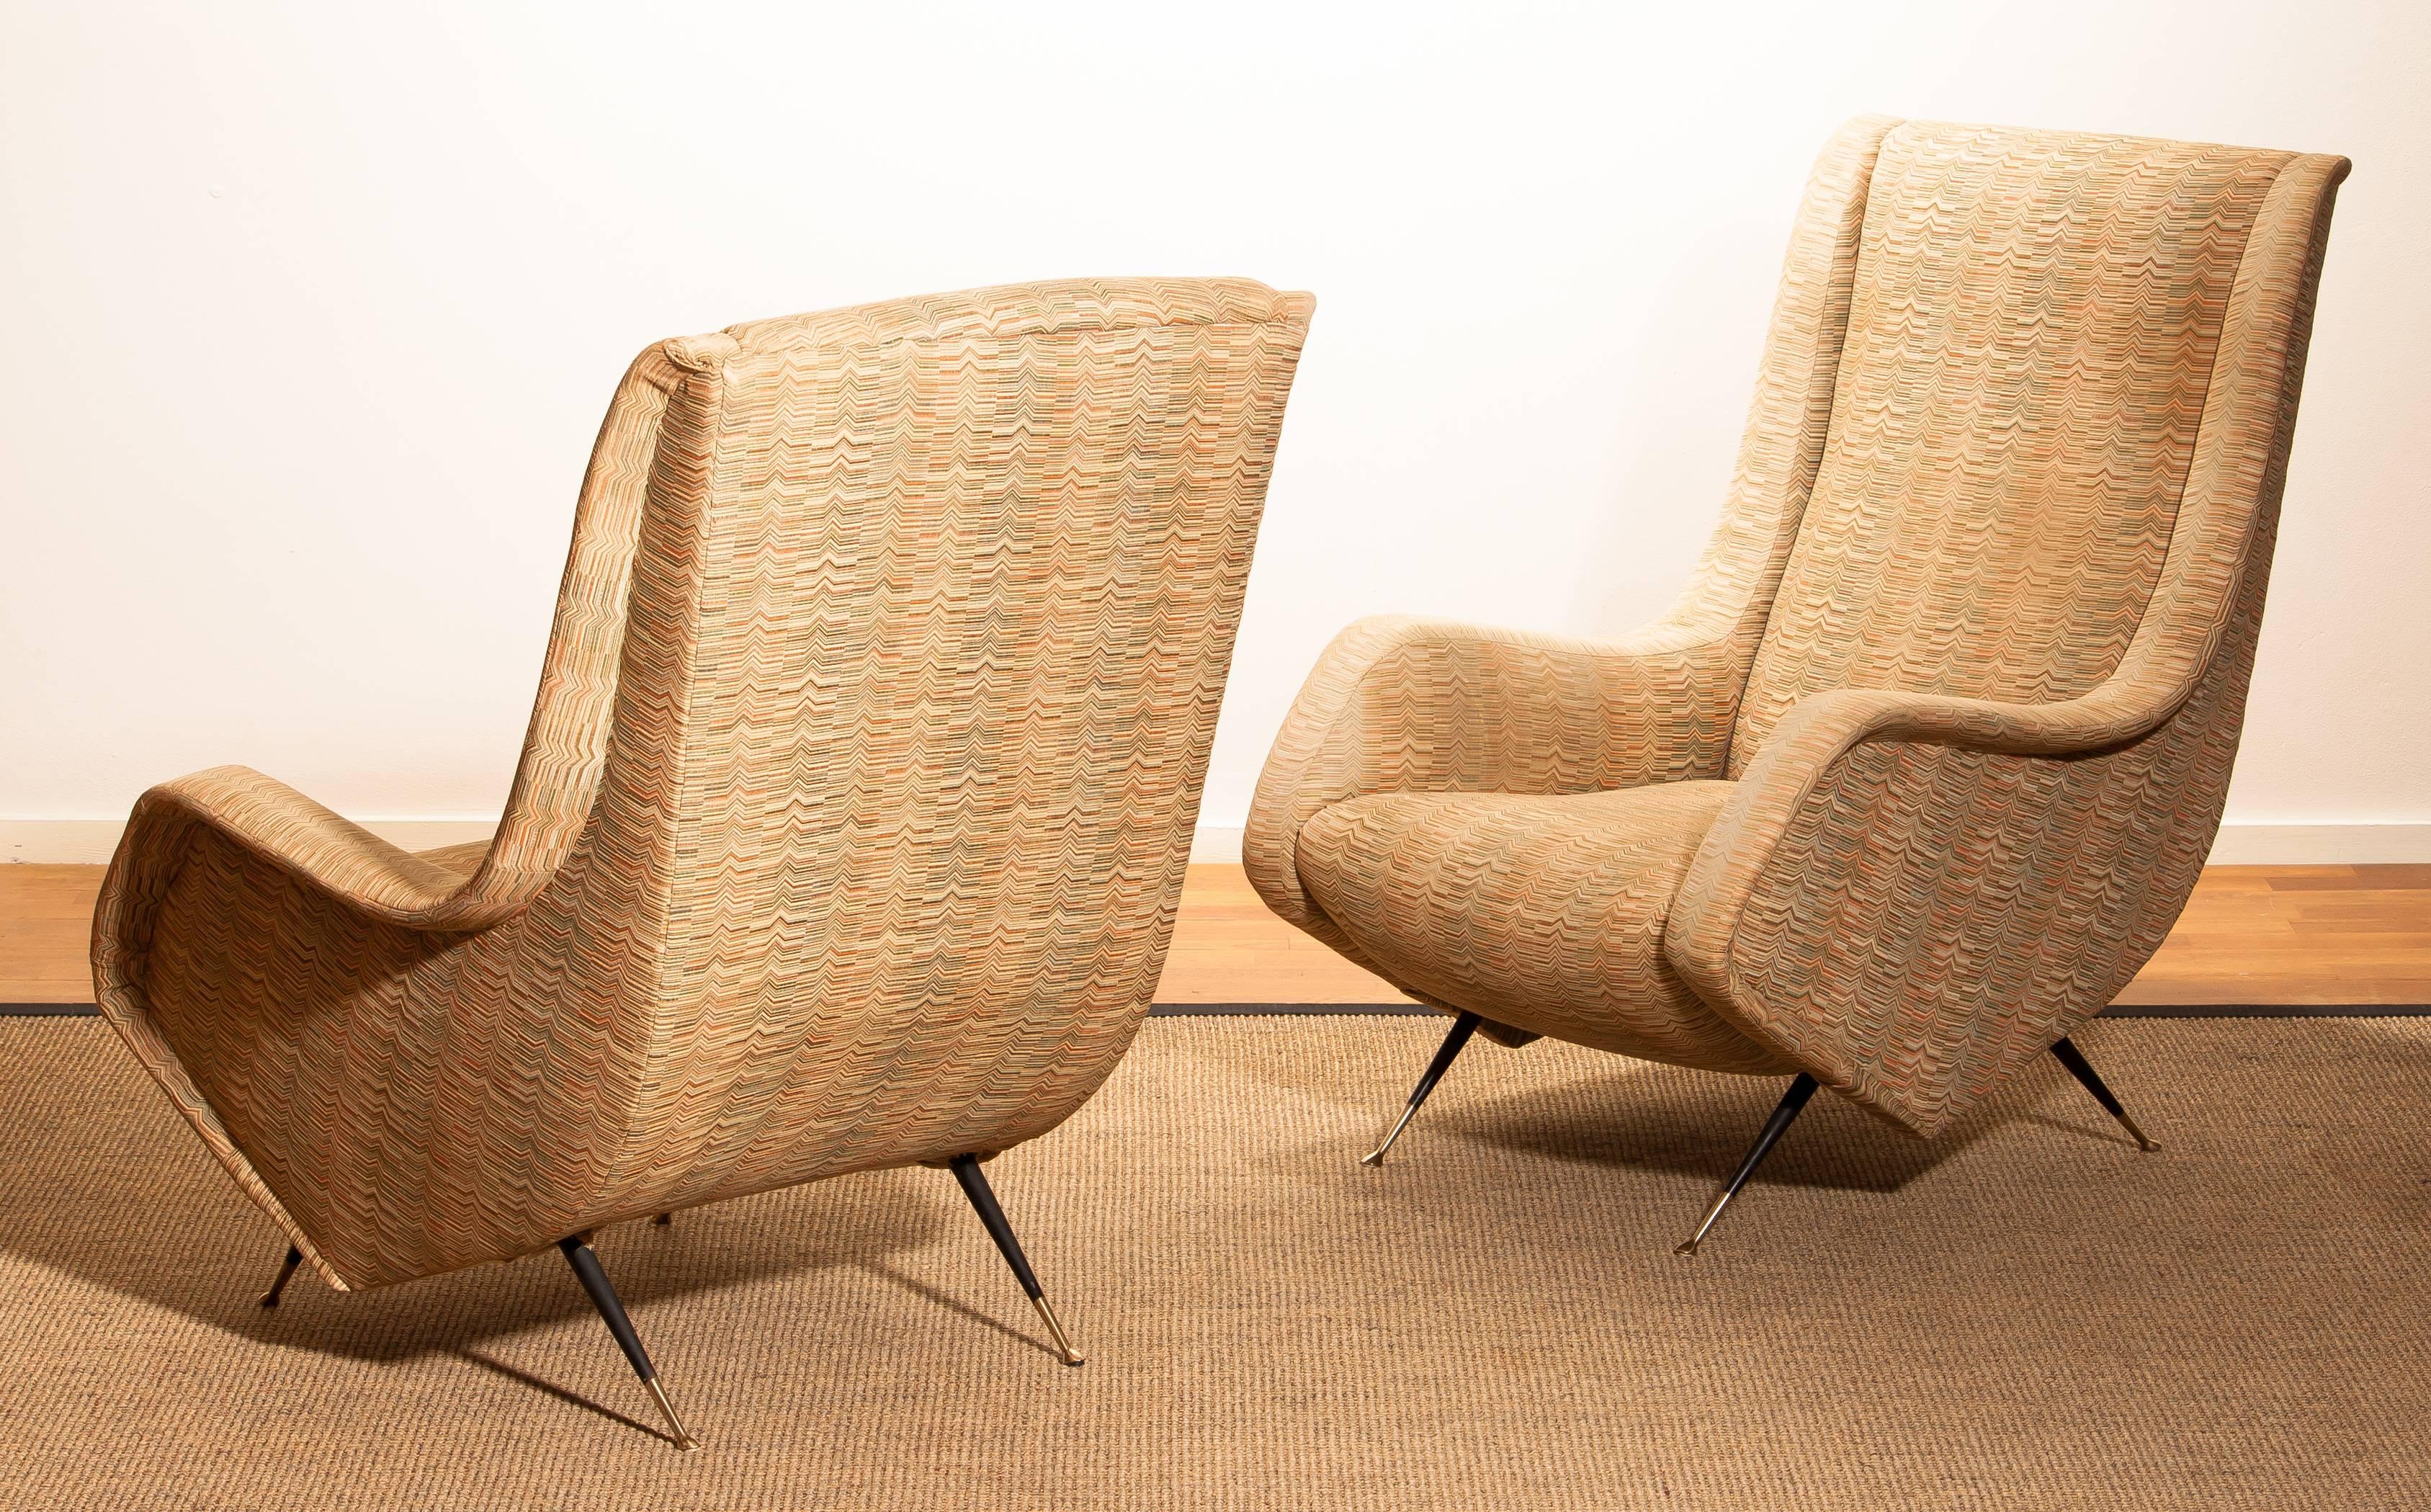 Mid-Century Modern Set of Two Original Easy Chairs from the 1950s by Aldo Morbelli for Isa Bergamo